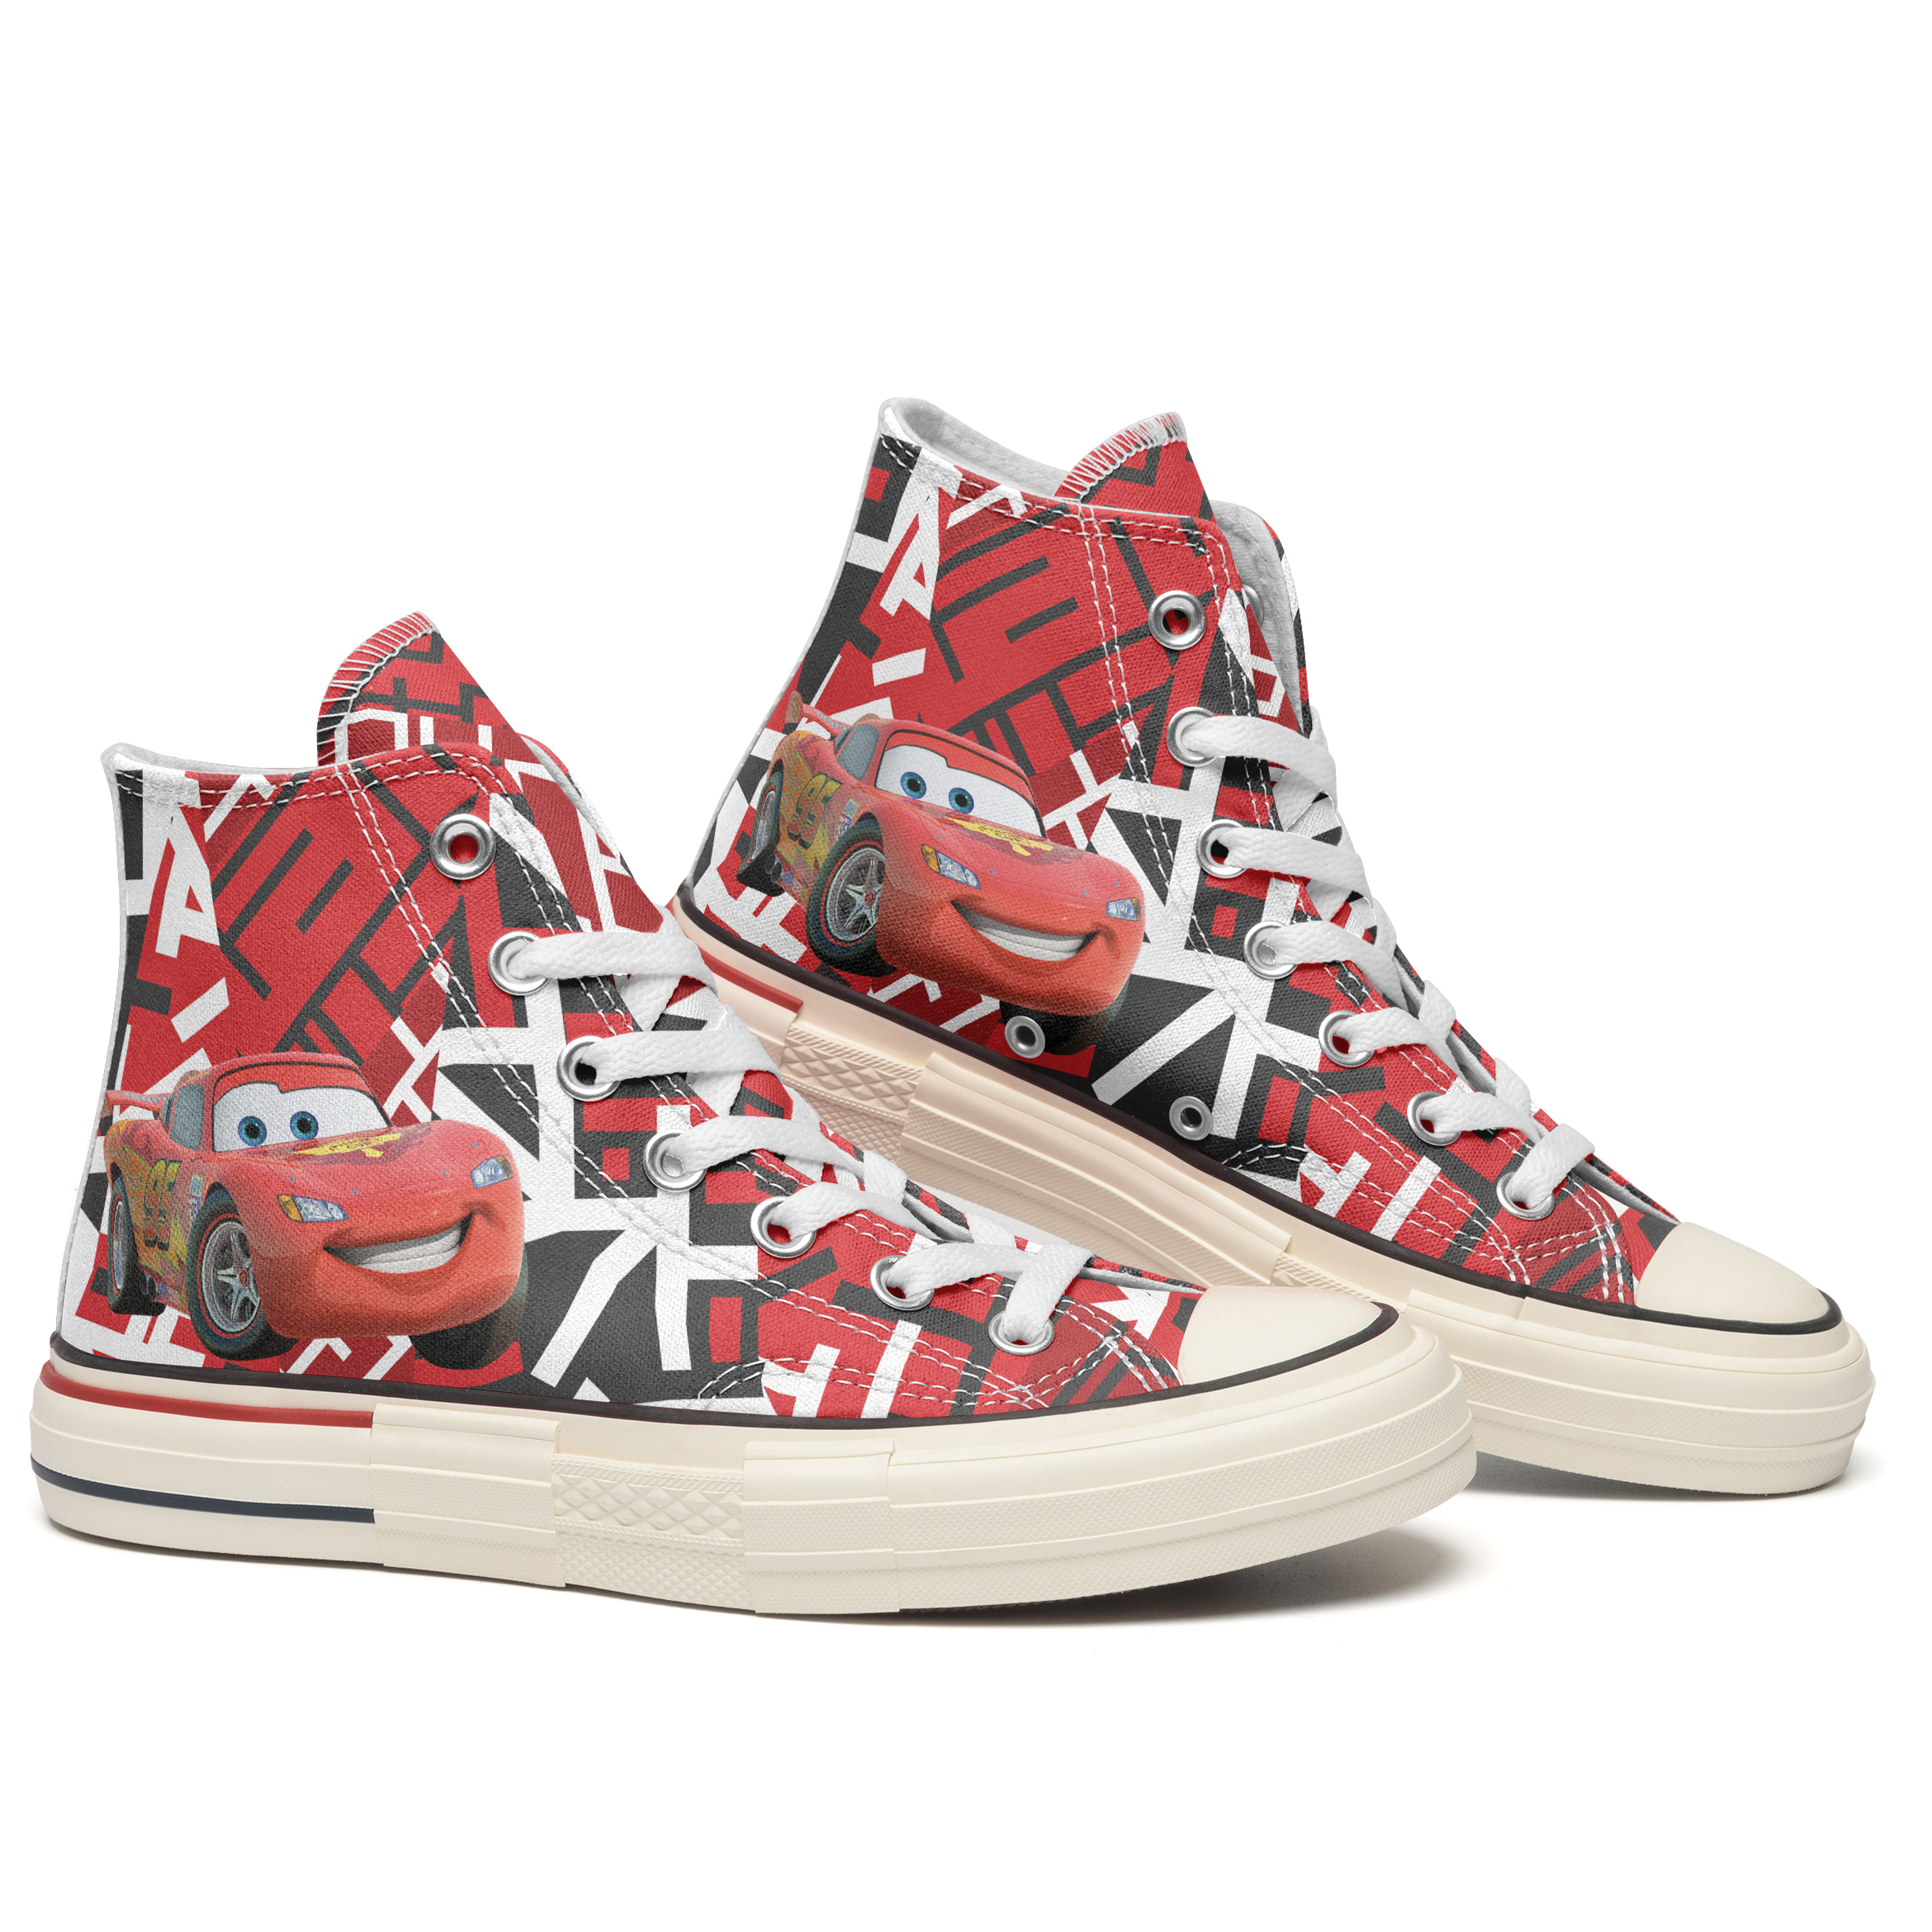 Marty Alex High Top Canvas Shoes Special Edition